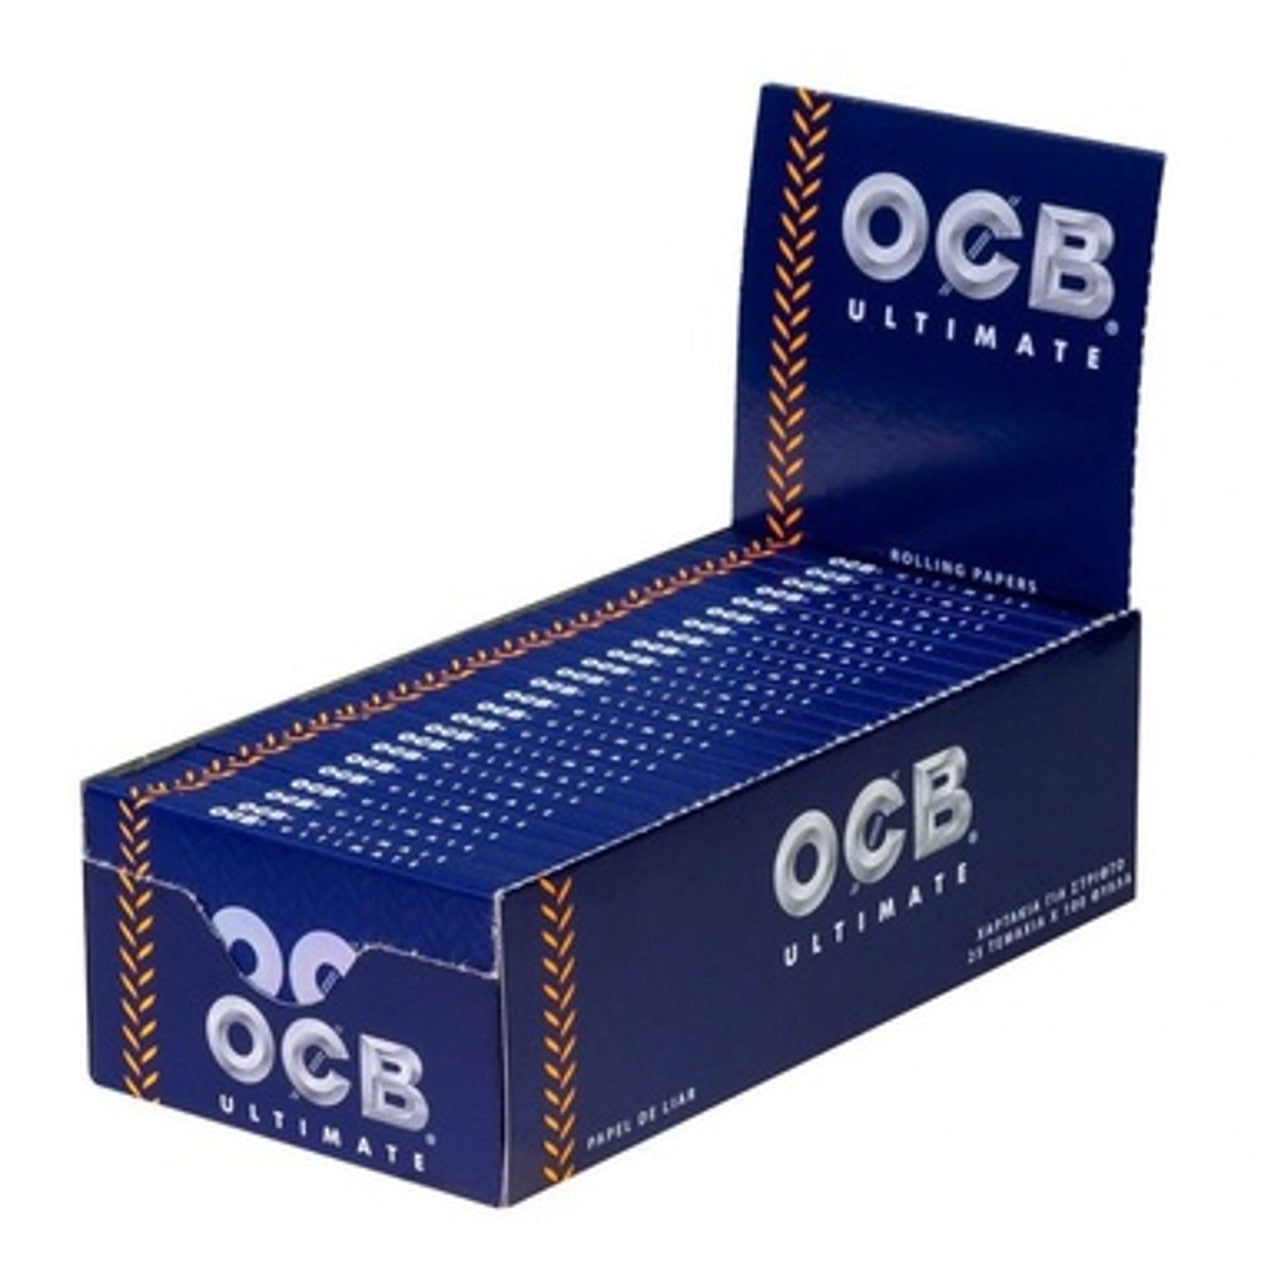 OCB Ultimate 1¼ Rolling Papers - 25ct